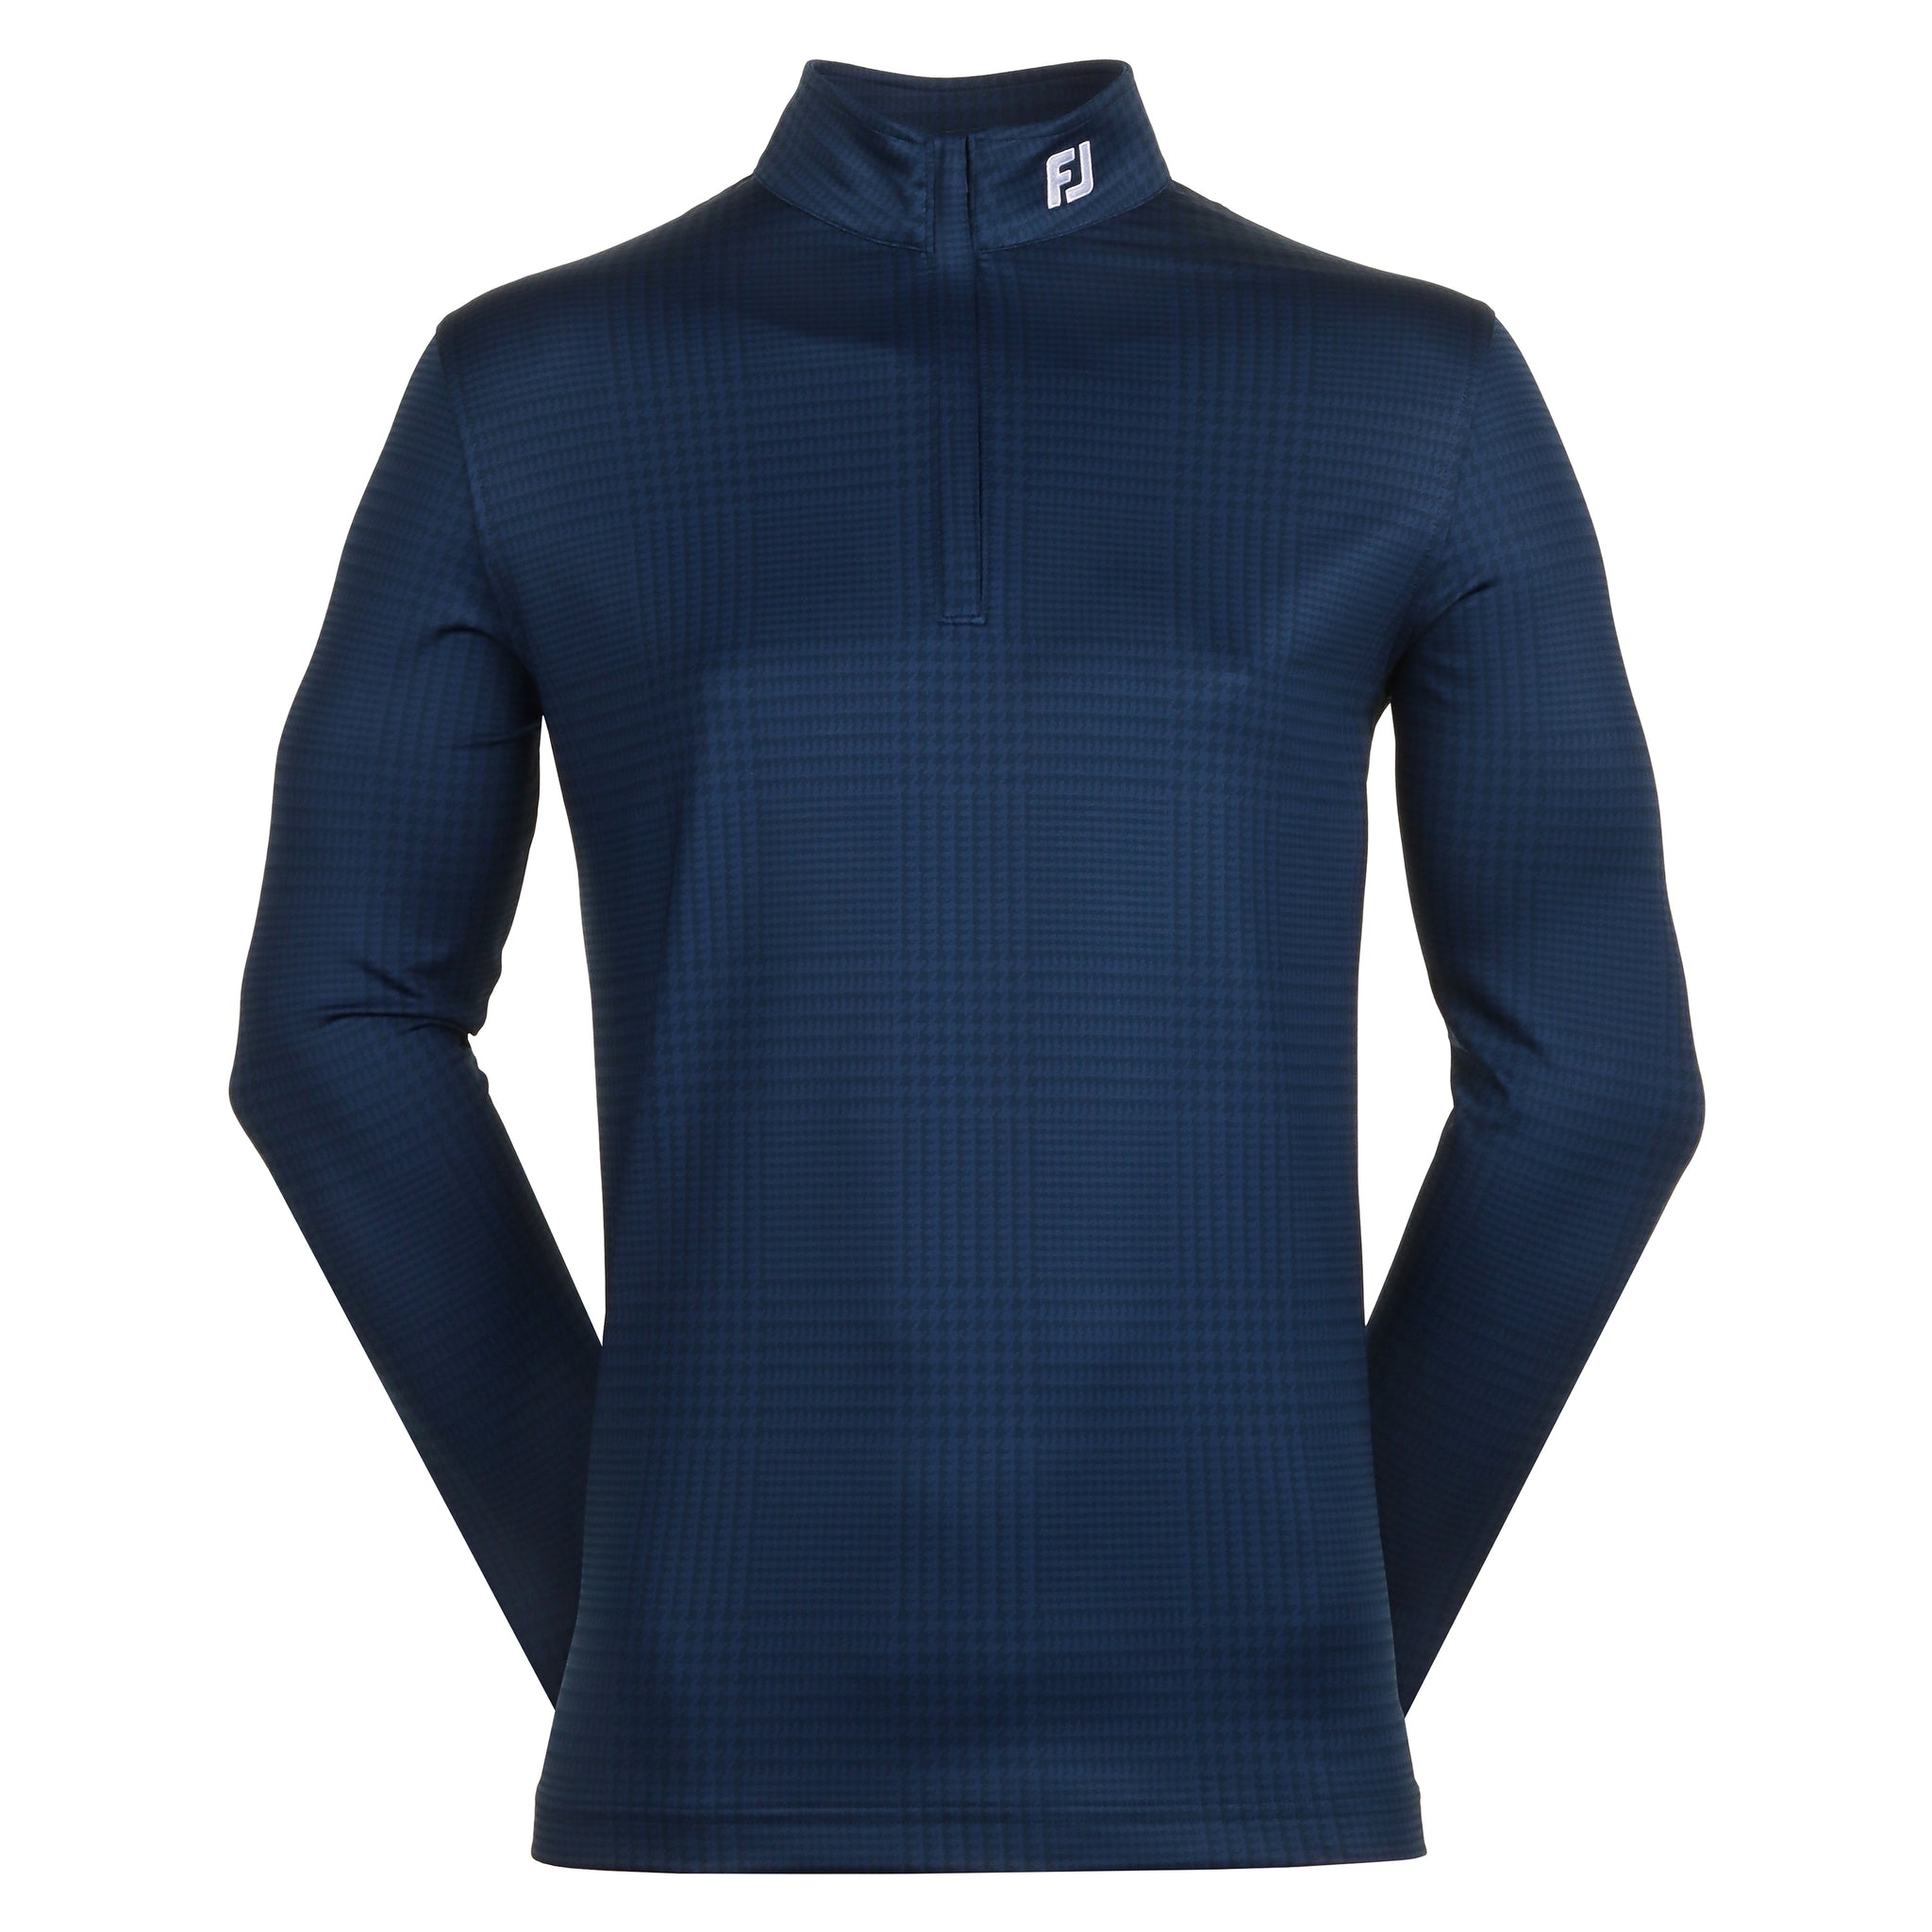 footjoy-glen-plaid-print-chill-out-pullover-81636-navy